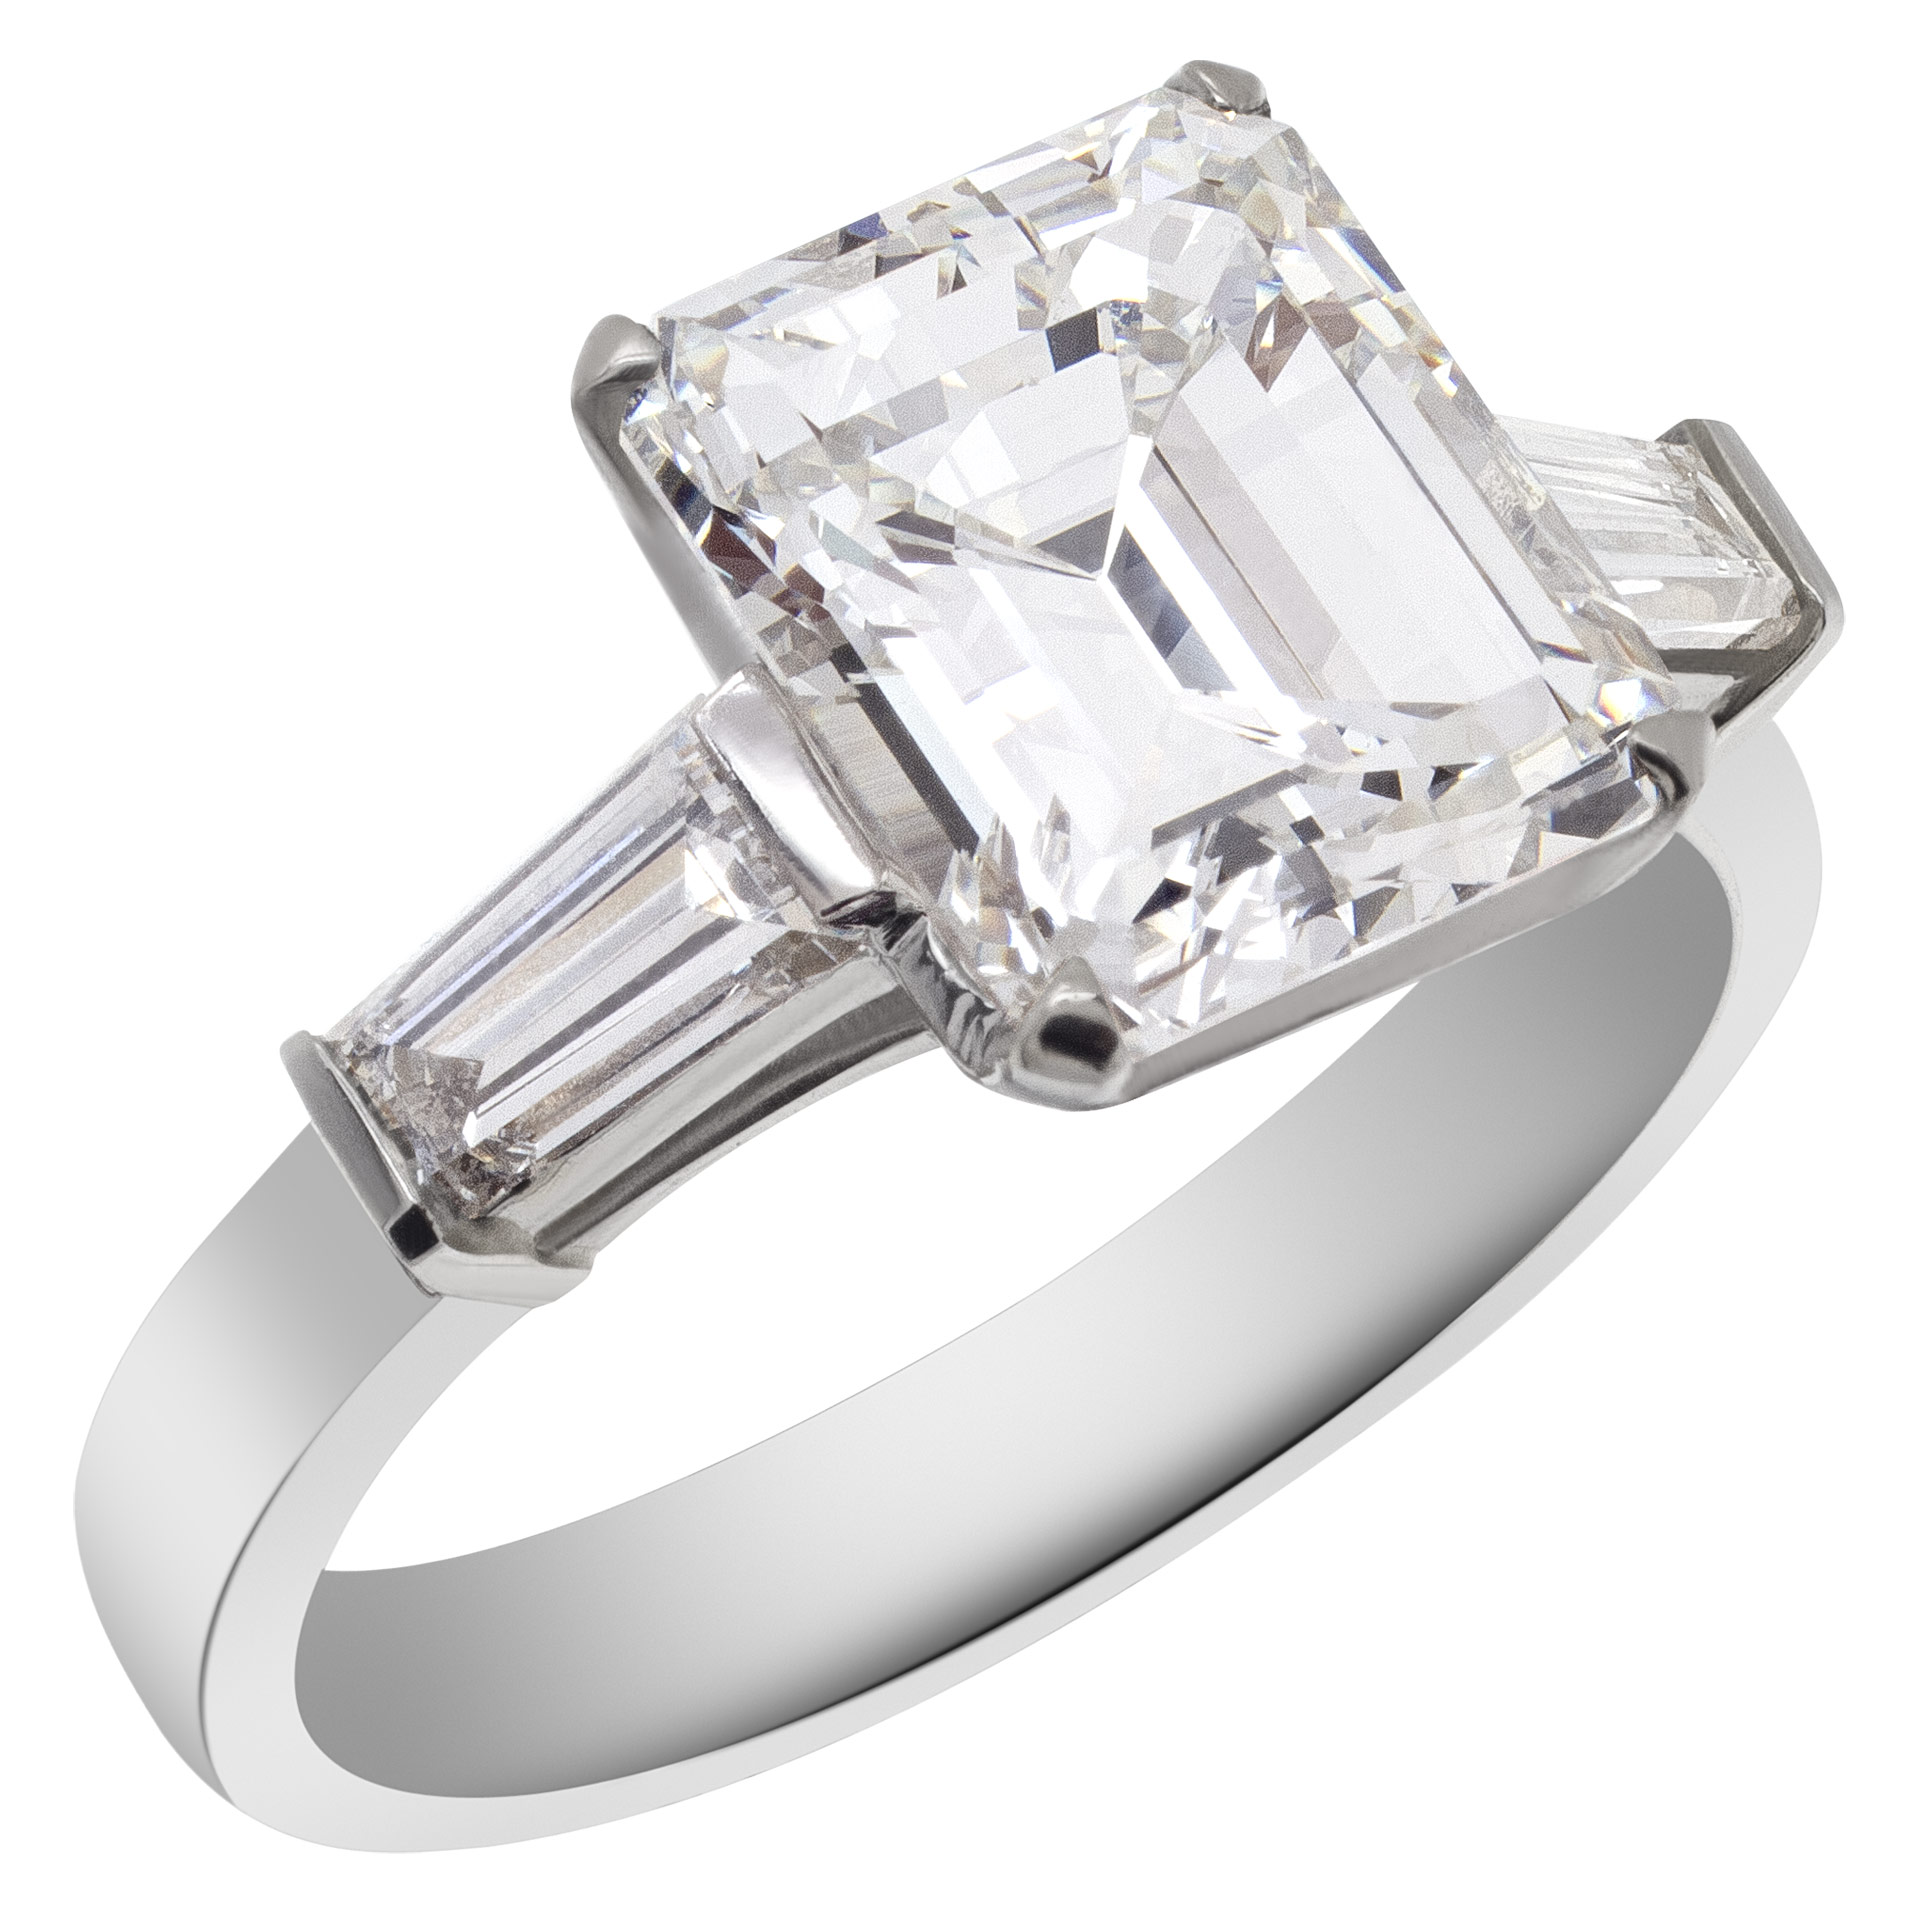 GIA certified emerald cut 3.95 carat (F color, VVS2 clarity) ring set in platinum setting image 2